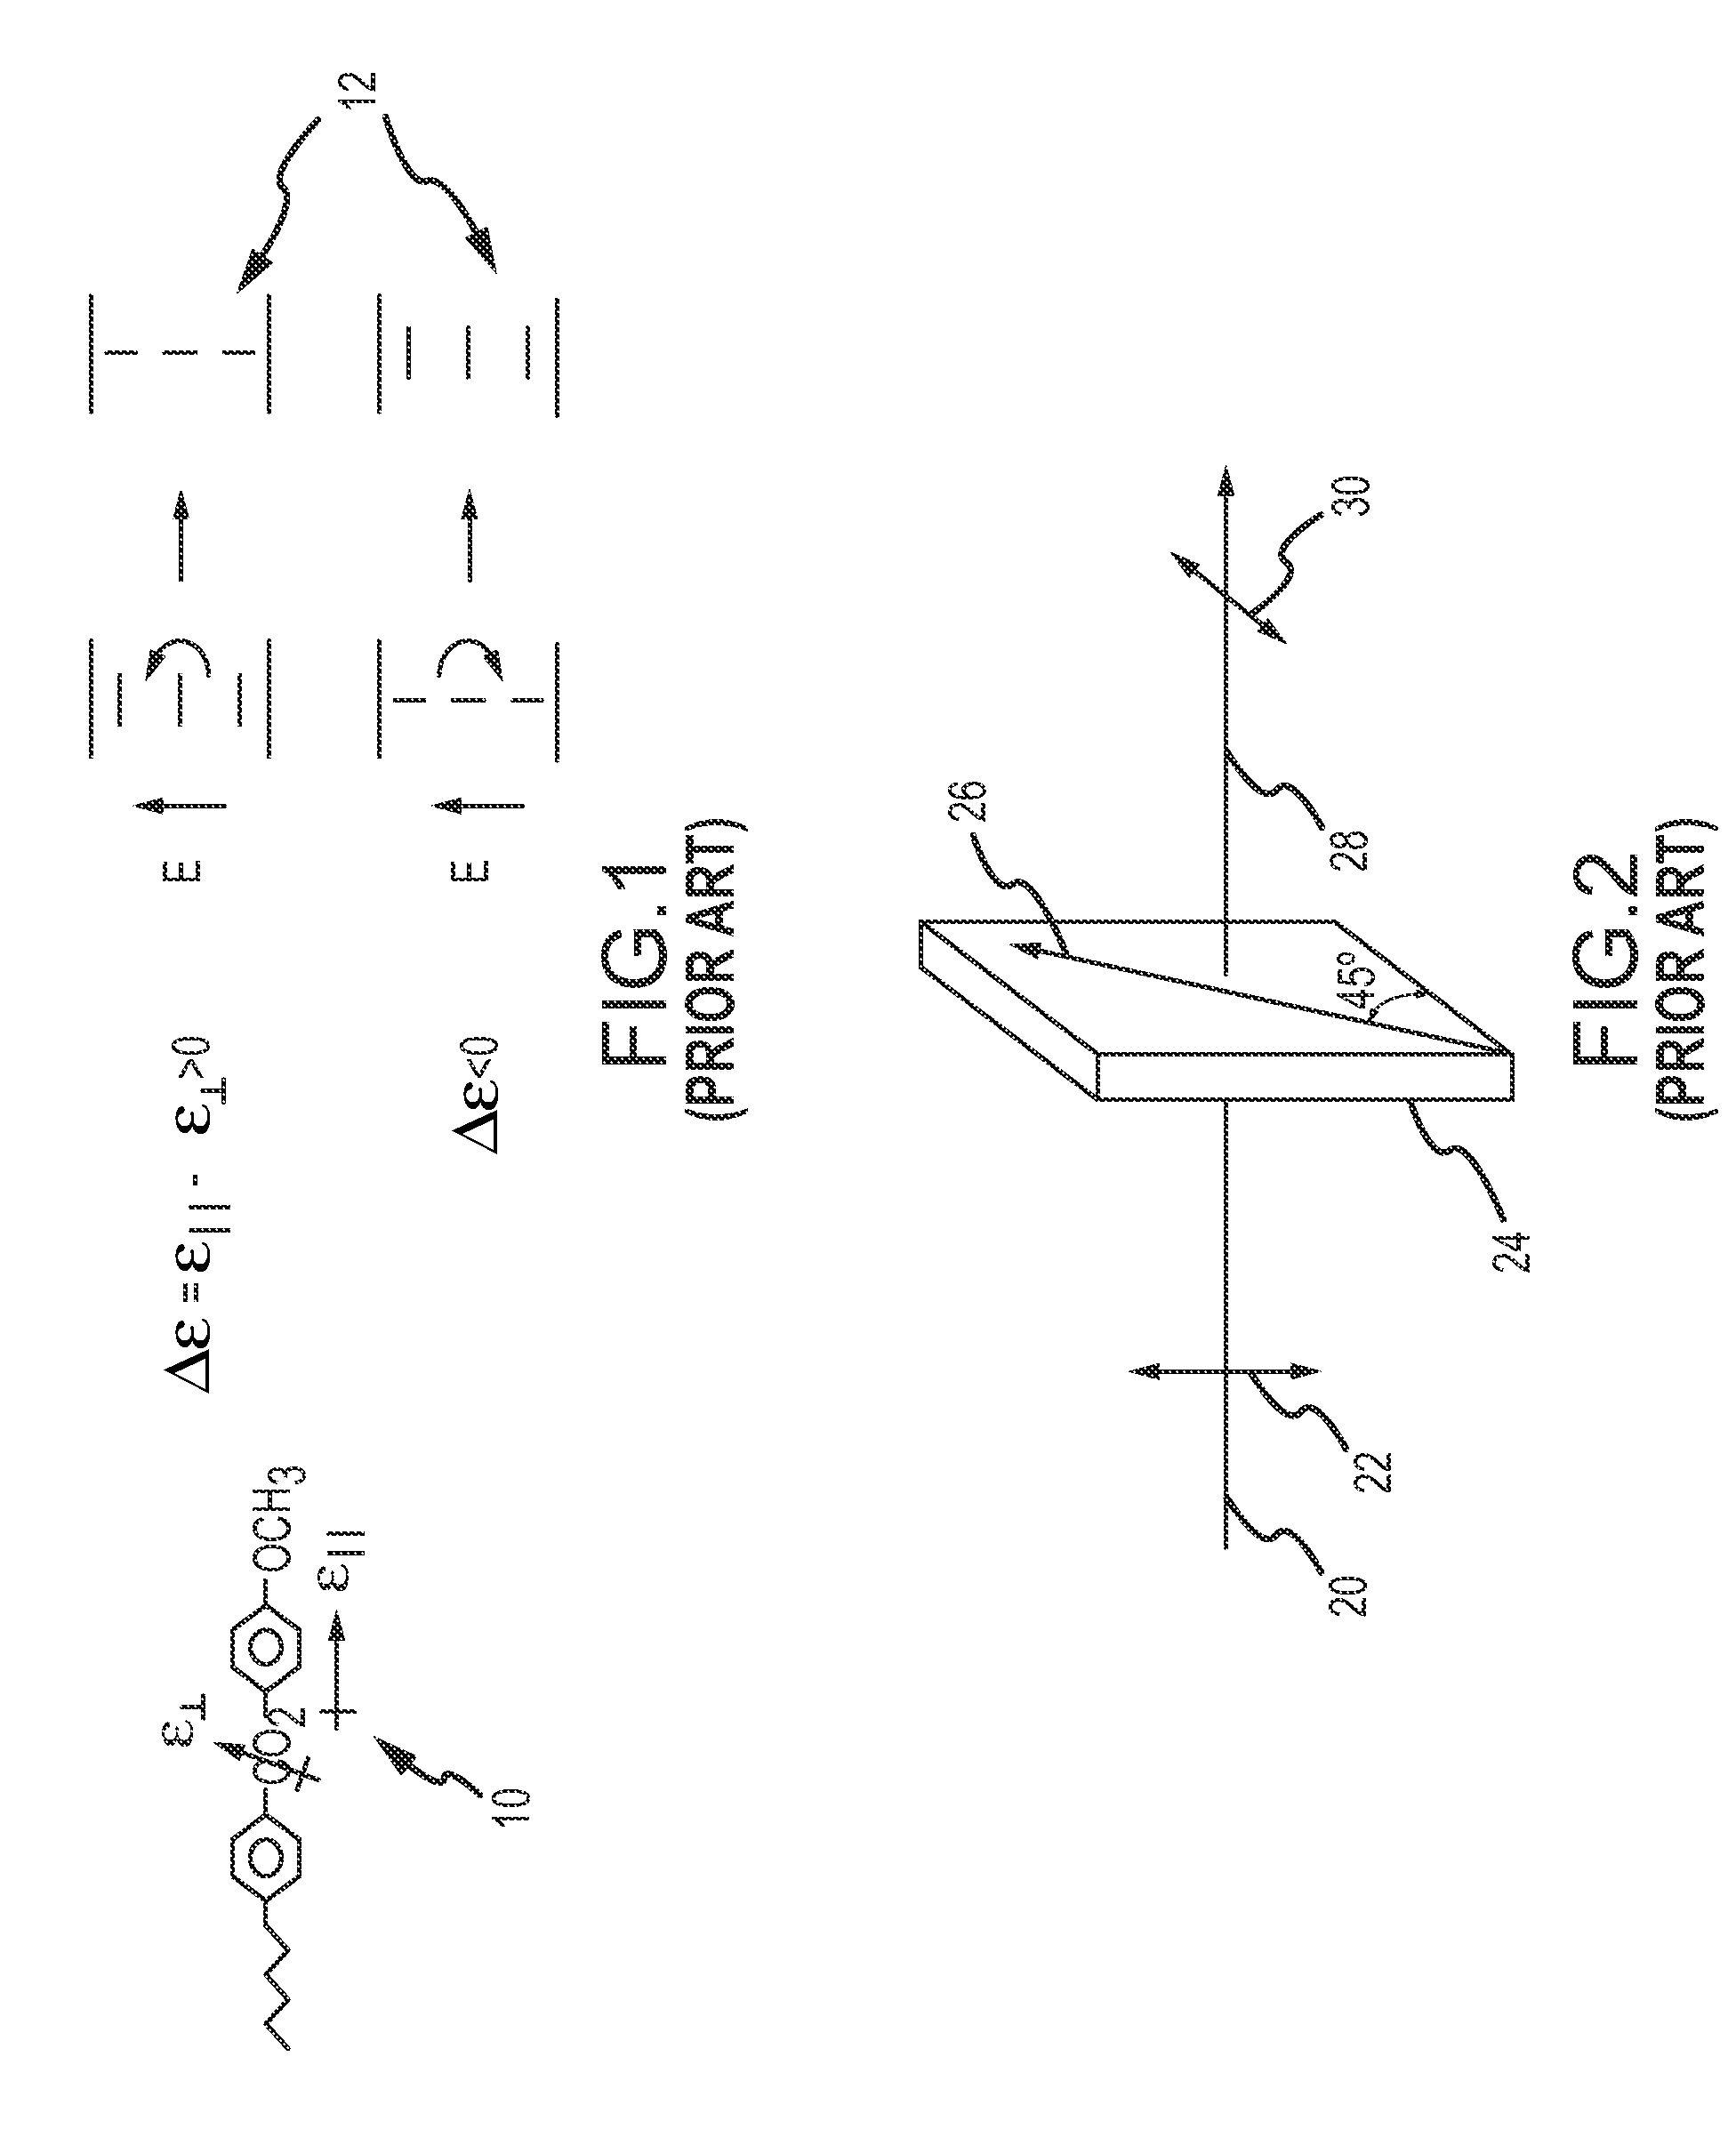 Two-stage drive waveform for switching a dual frequency liquid crystal (DFLC) at large tilt angles